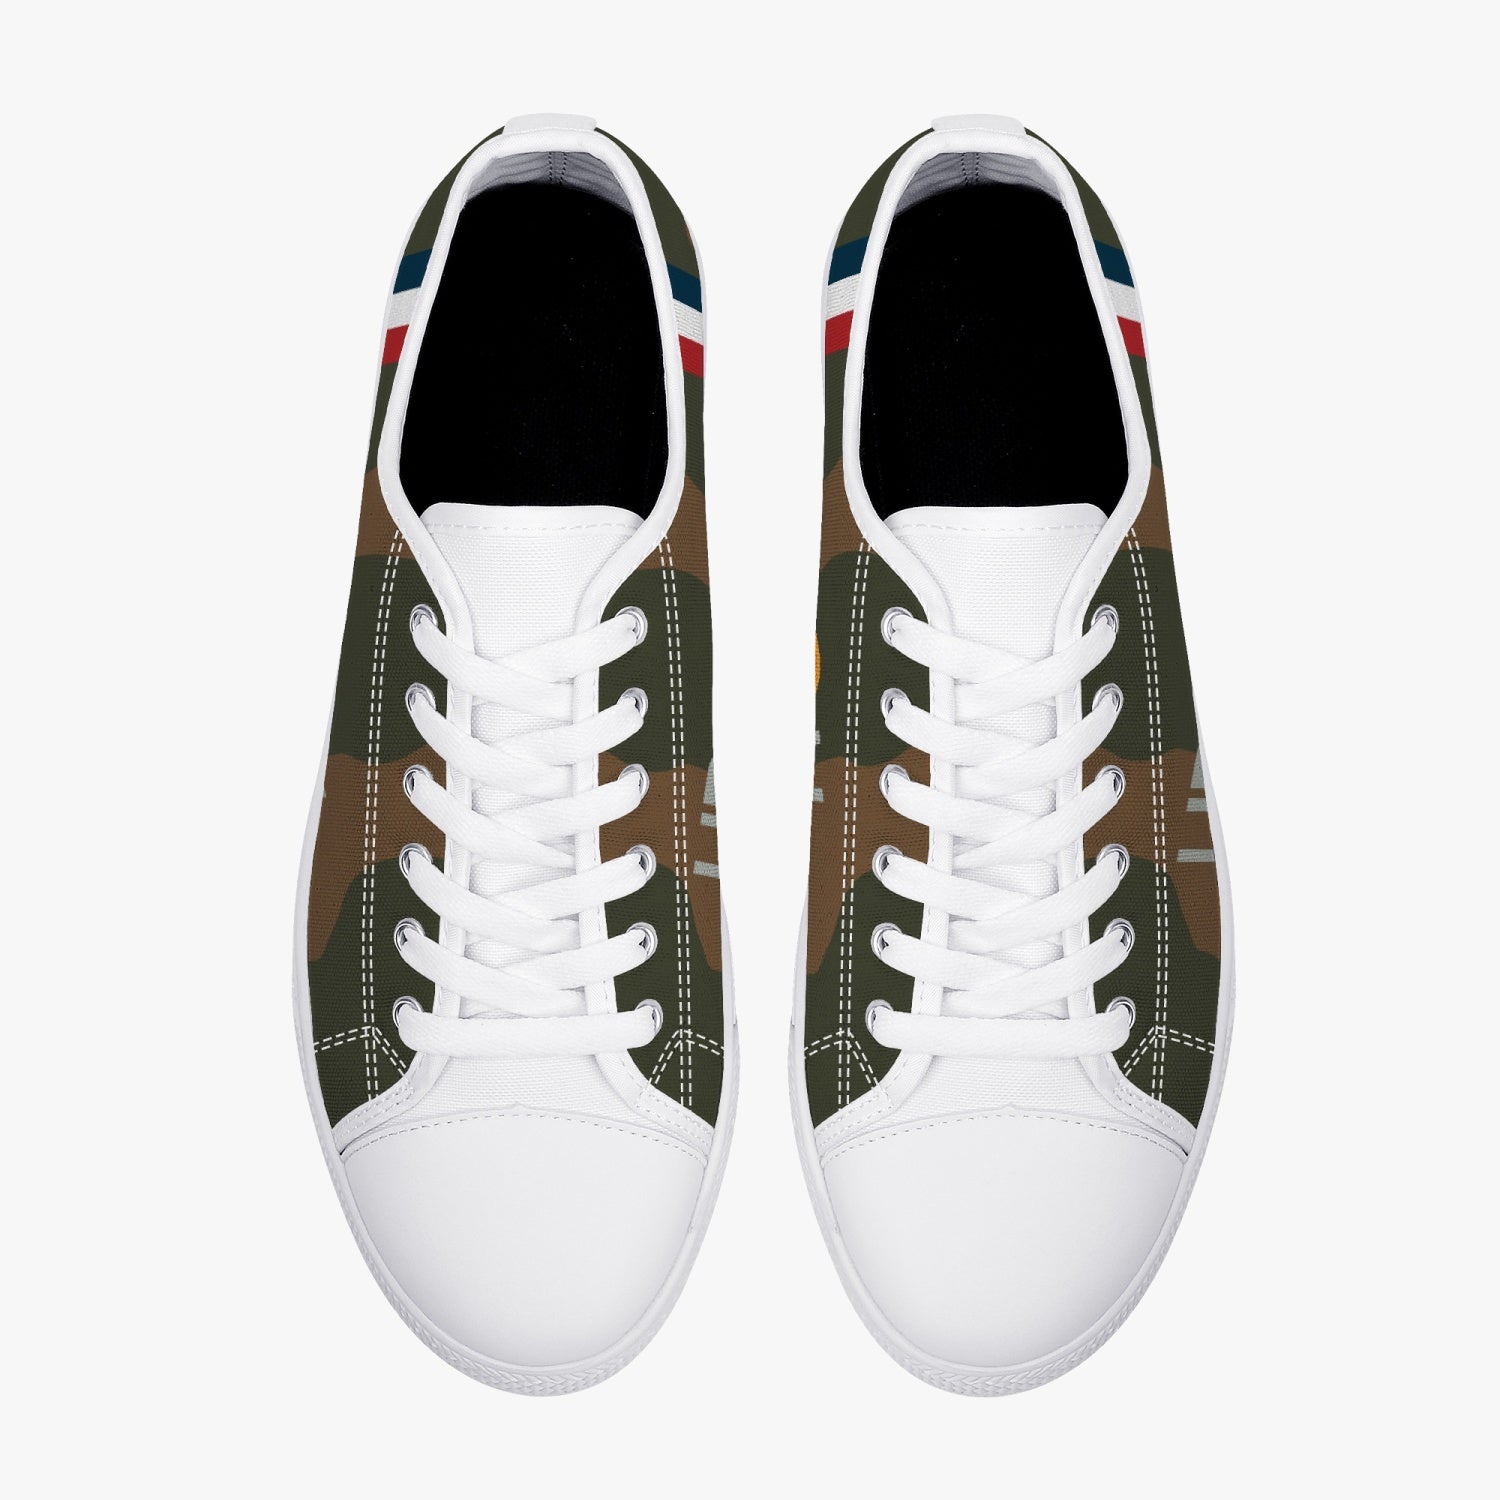 Hurricane "UP-W" Low Top Canvas Shoes - I Love a Hangar